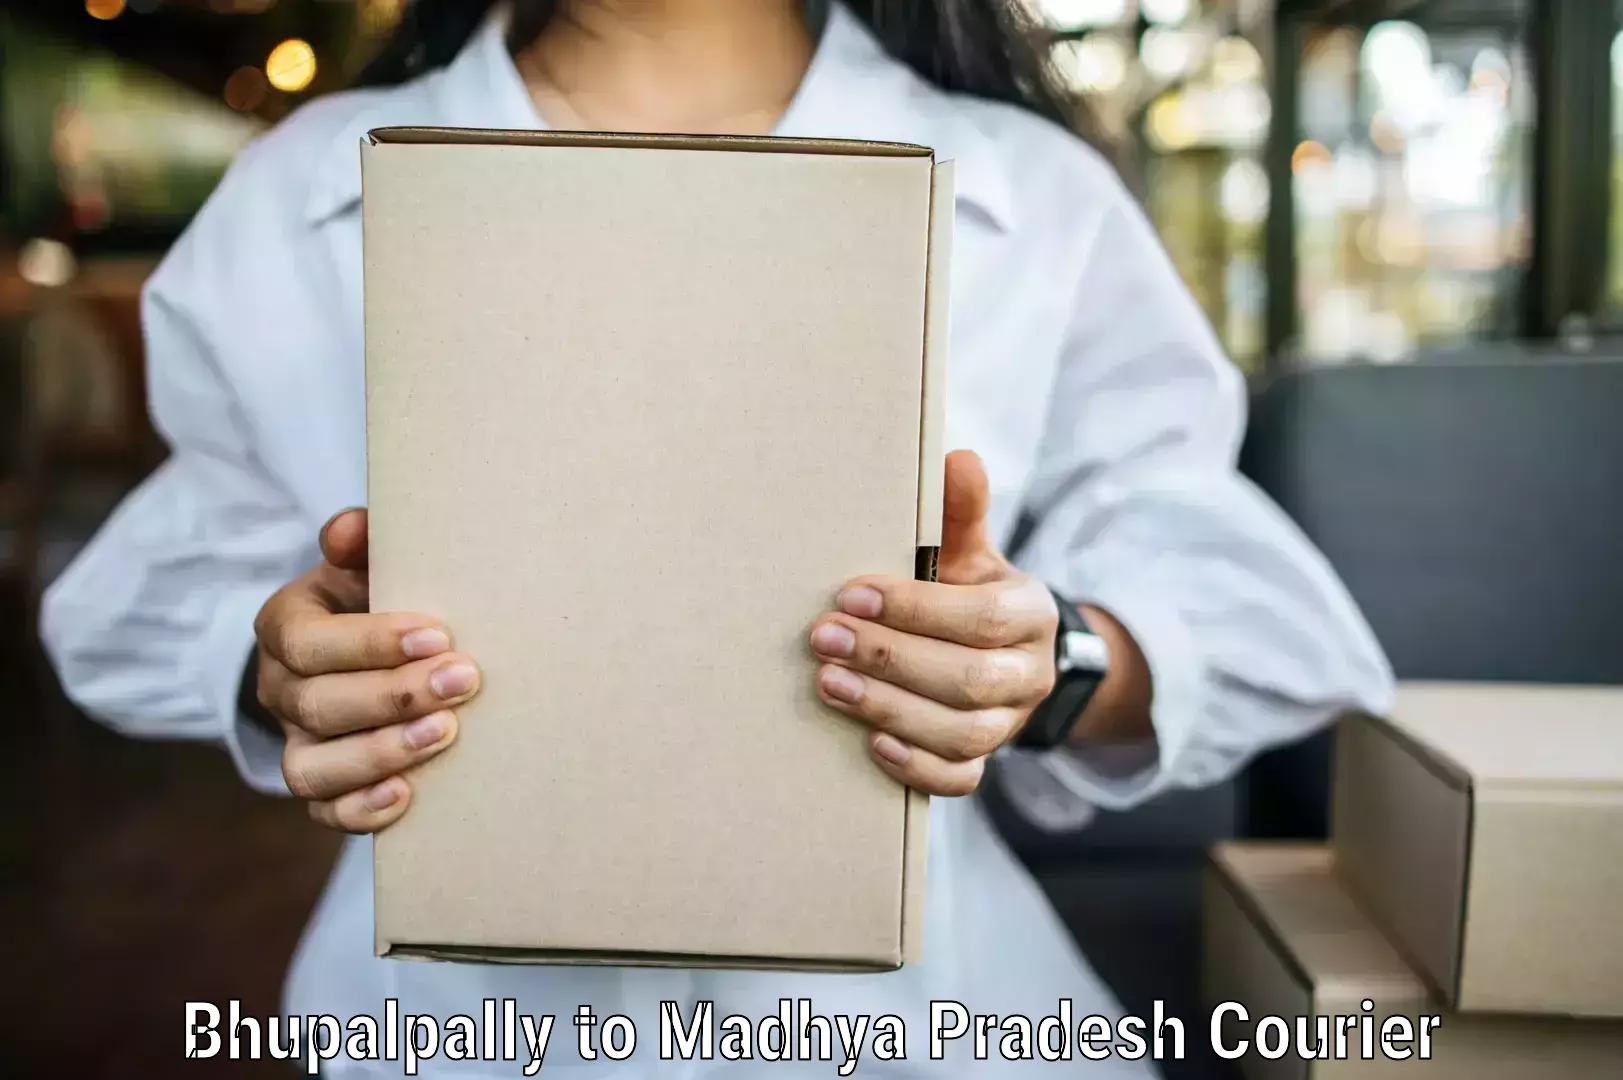 State-of-the-art courier technology Bhupalpally to Raghogarh